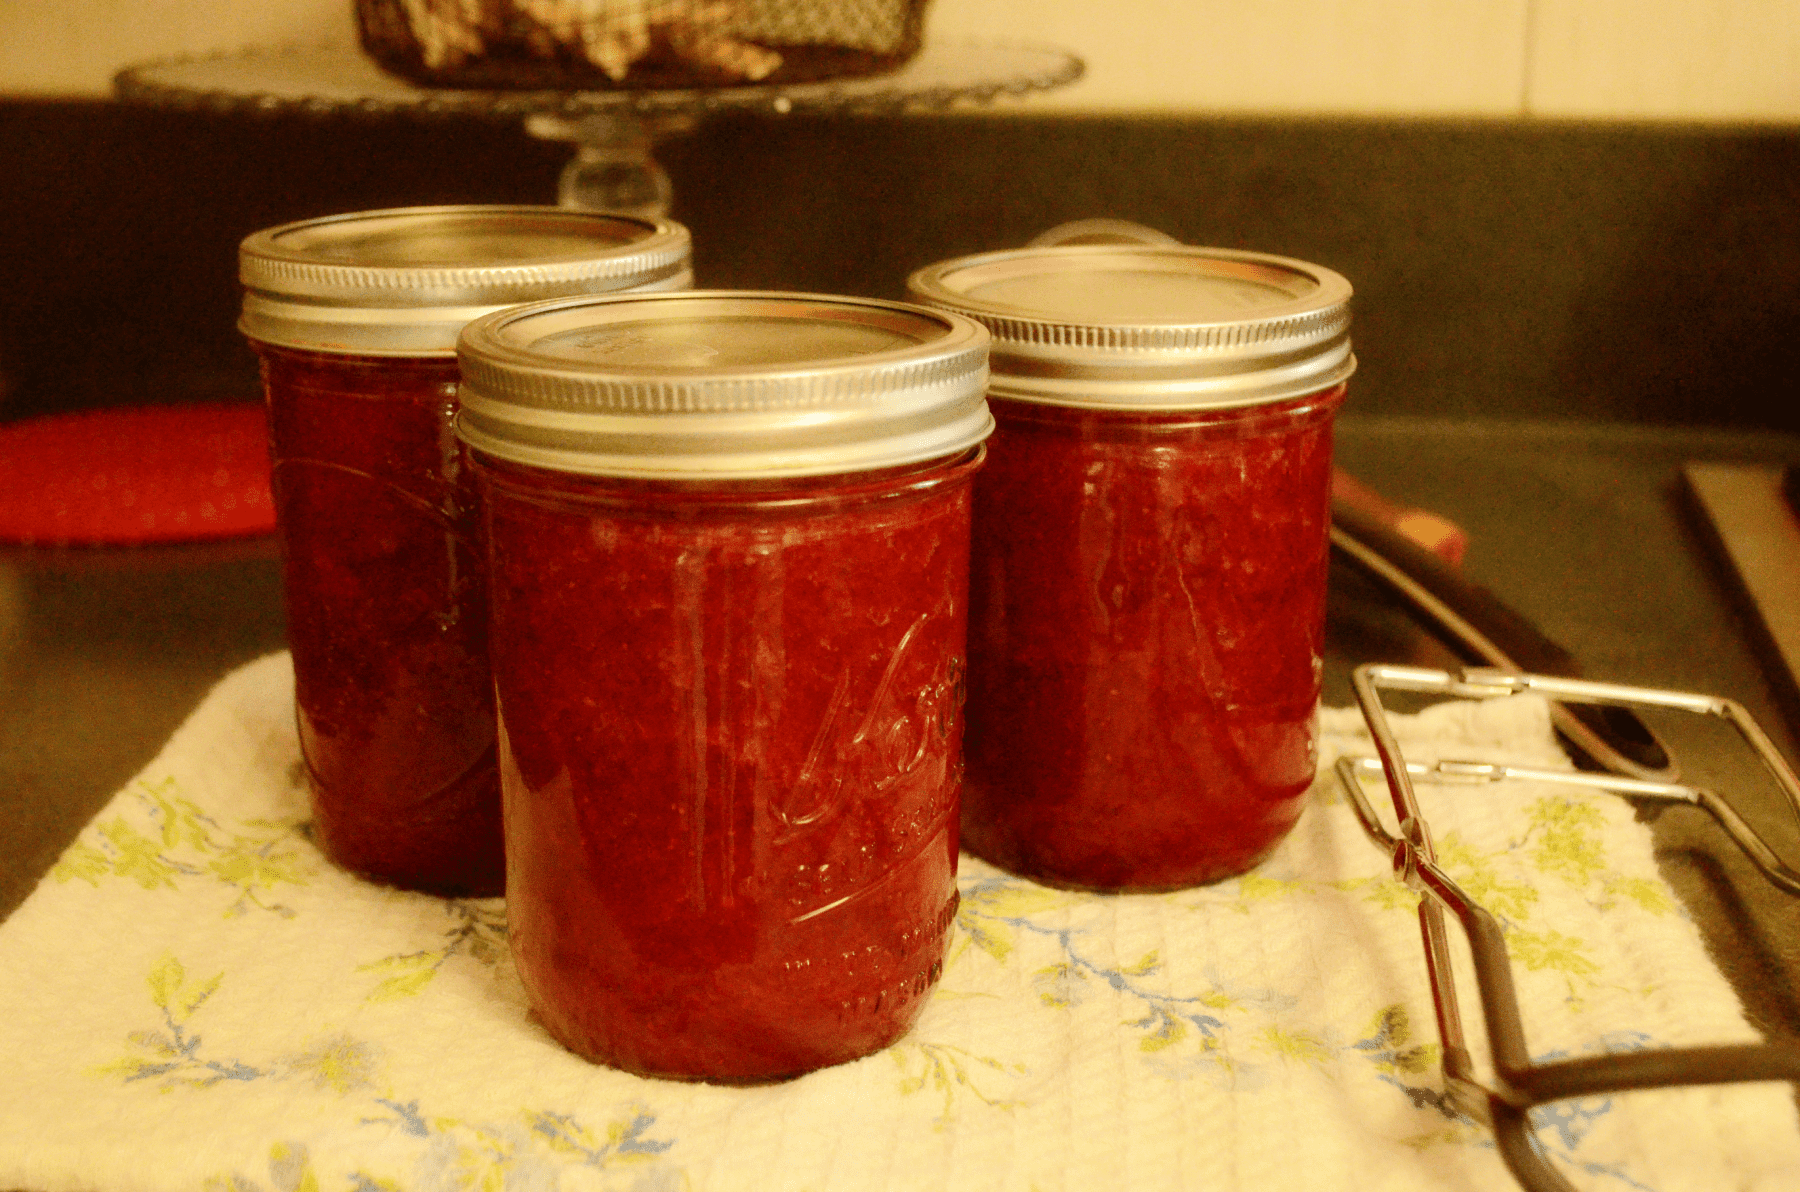 Three jars are filled with fresh strawberry jam cooling on a floral towel. Next to the jars lies a canning jar lifter.